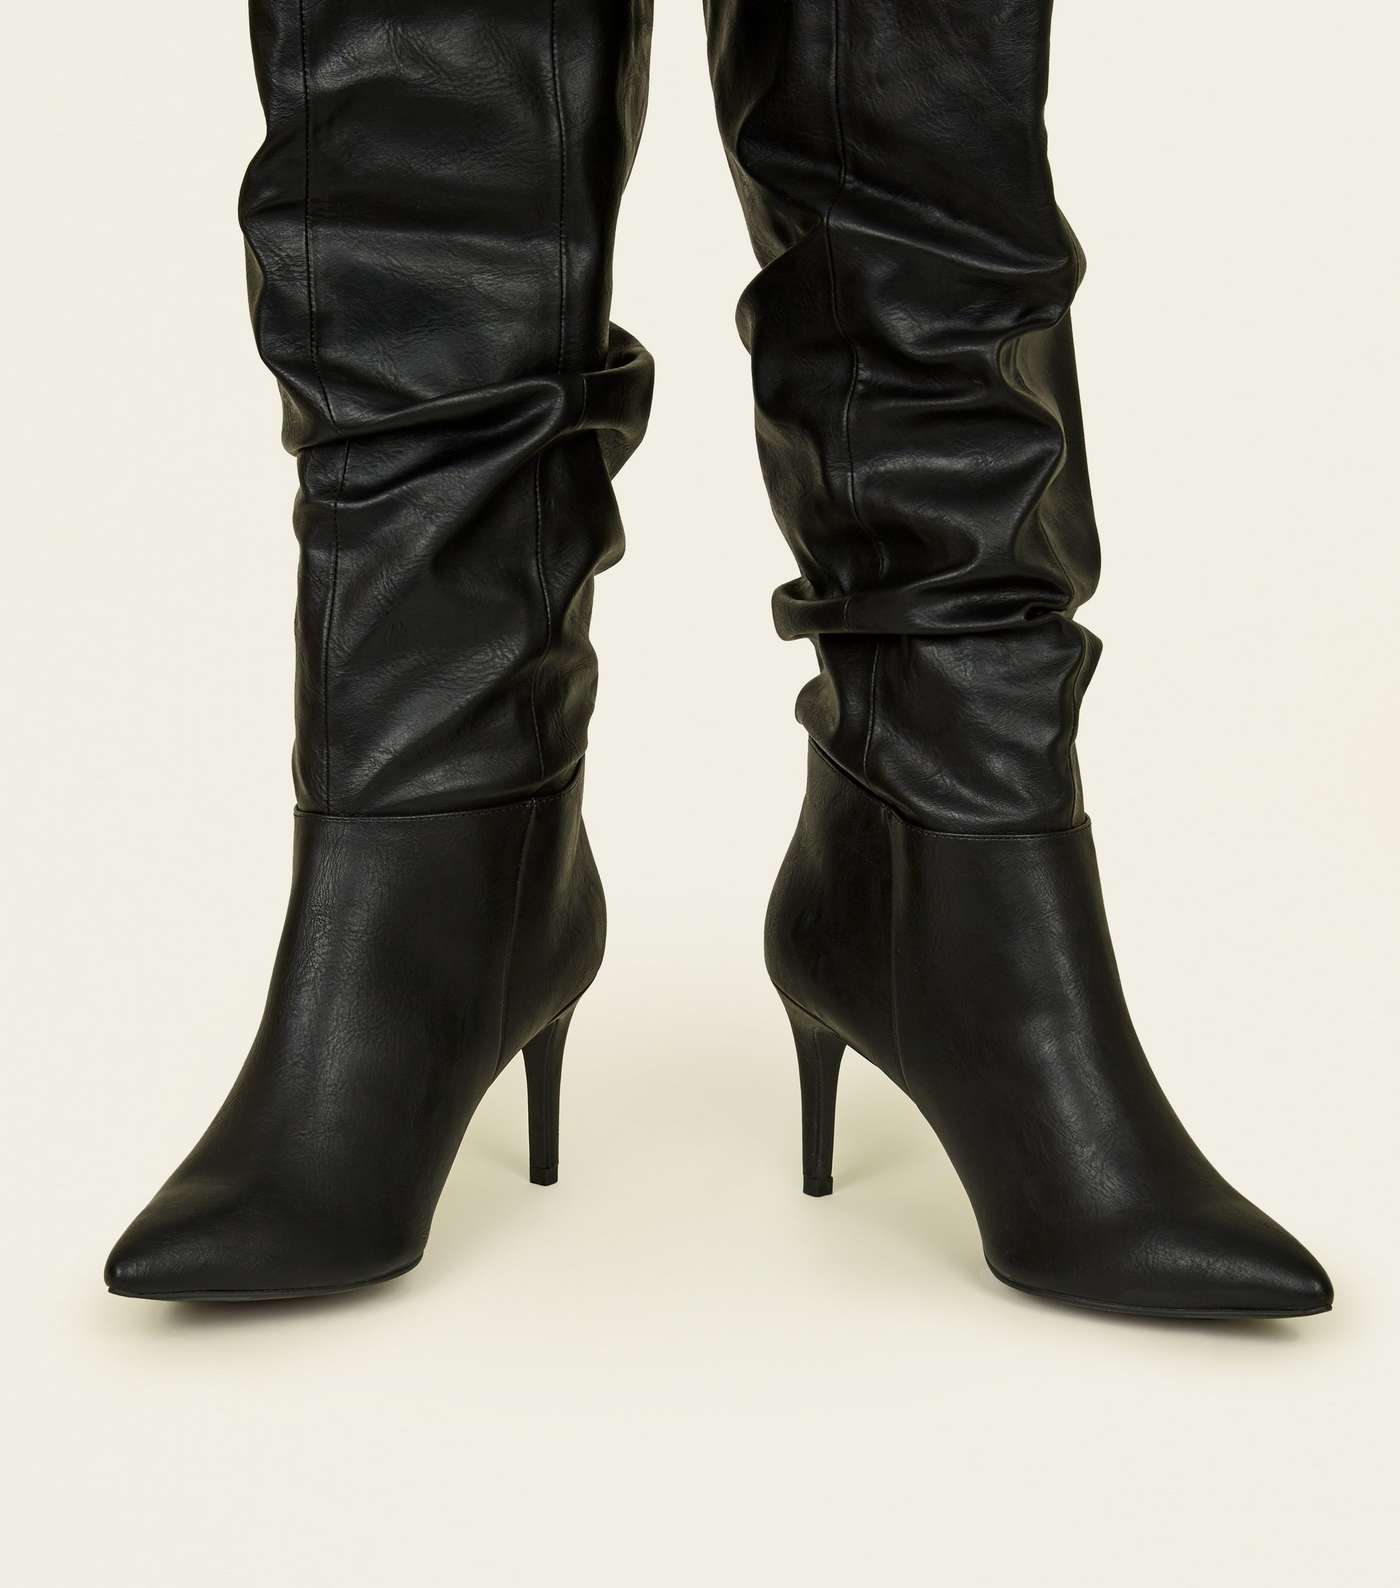 Black Leather-Look Knee High Stiletto Slouch Boots Image 3